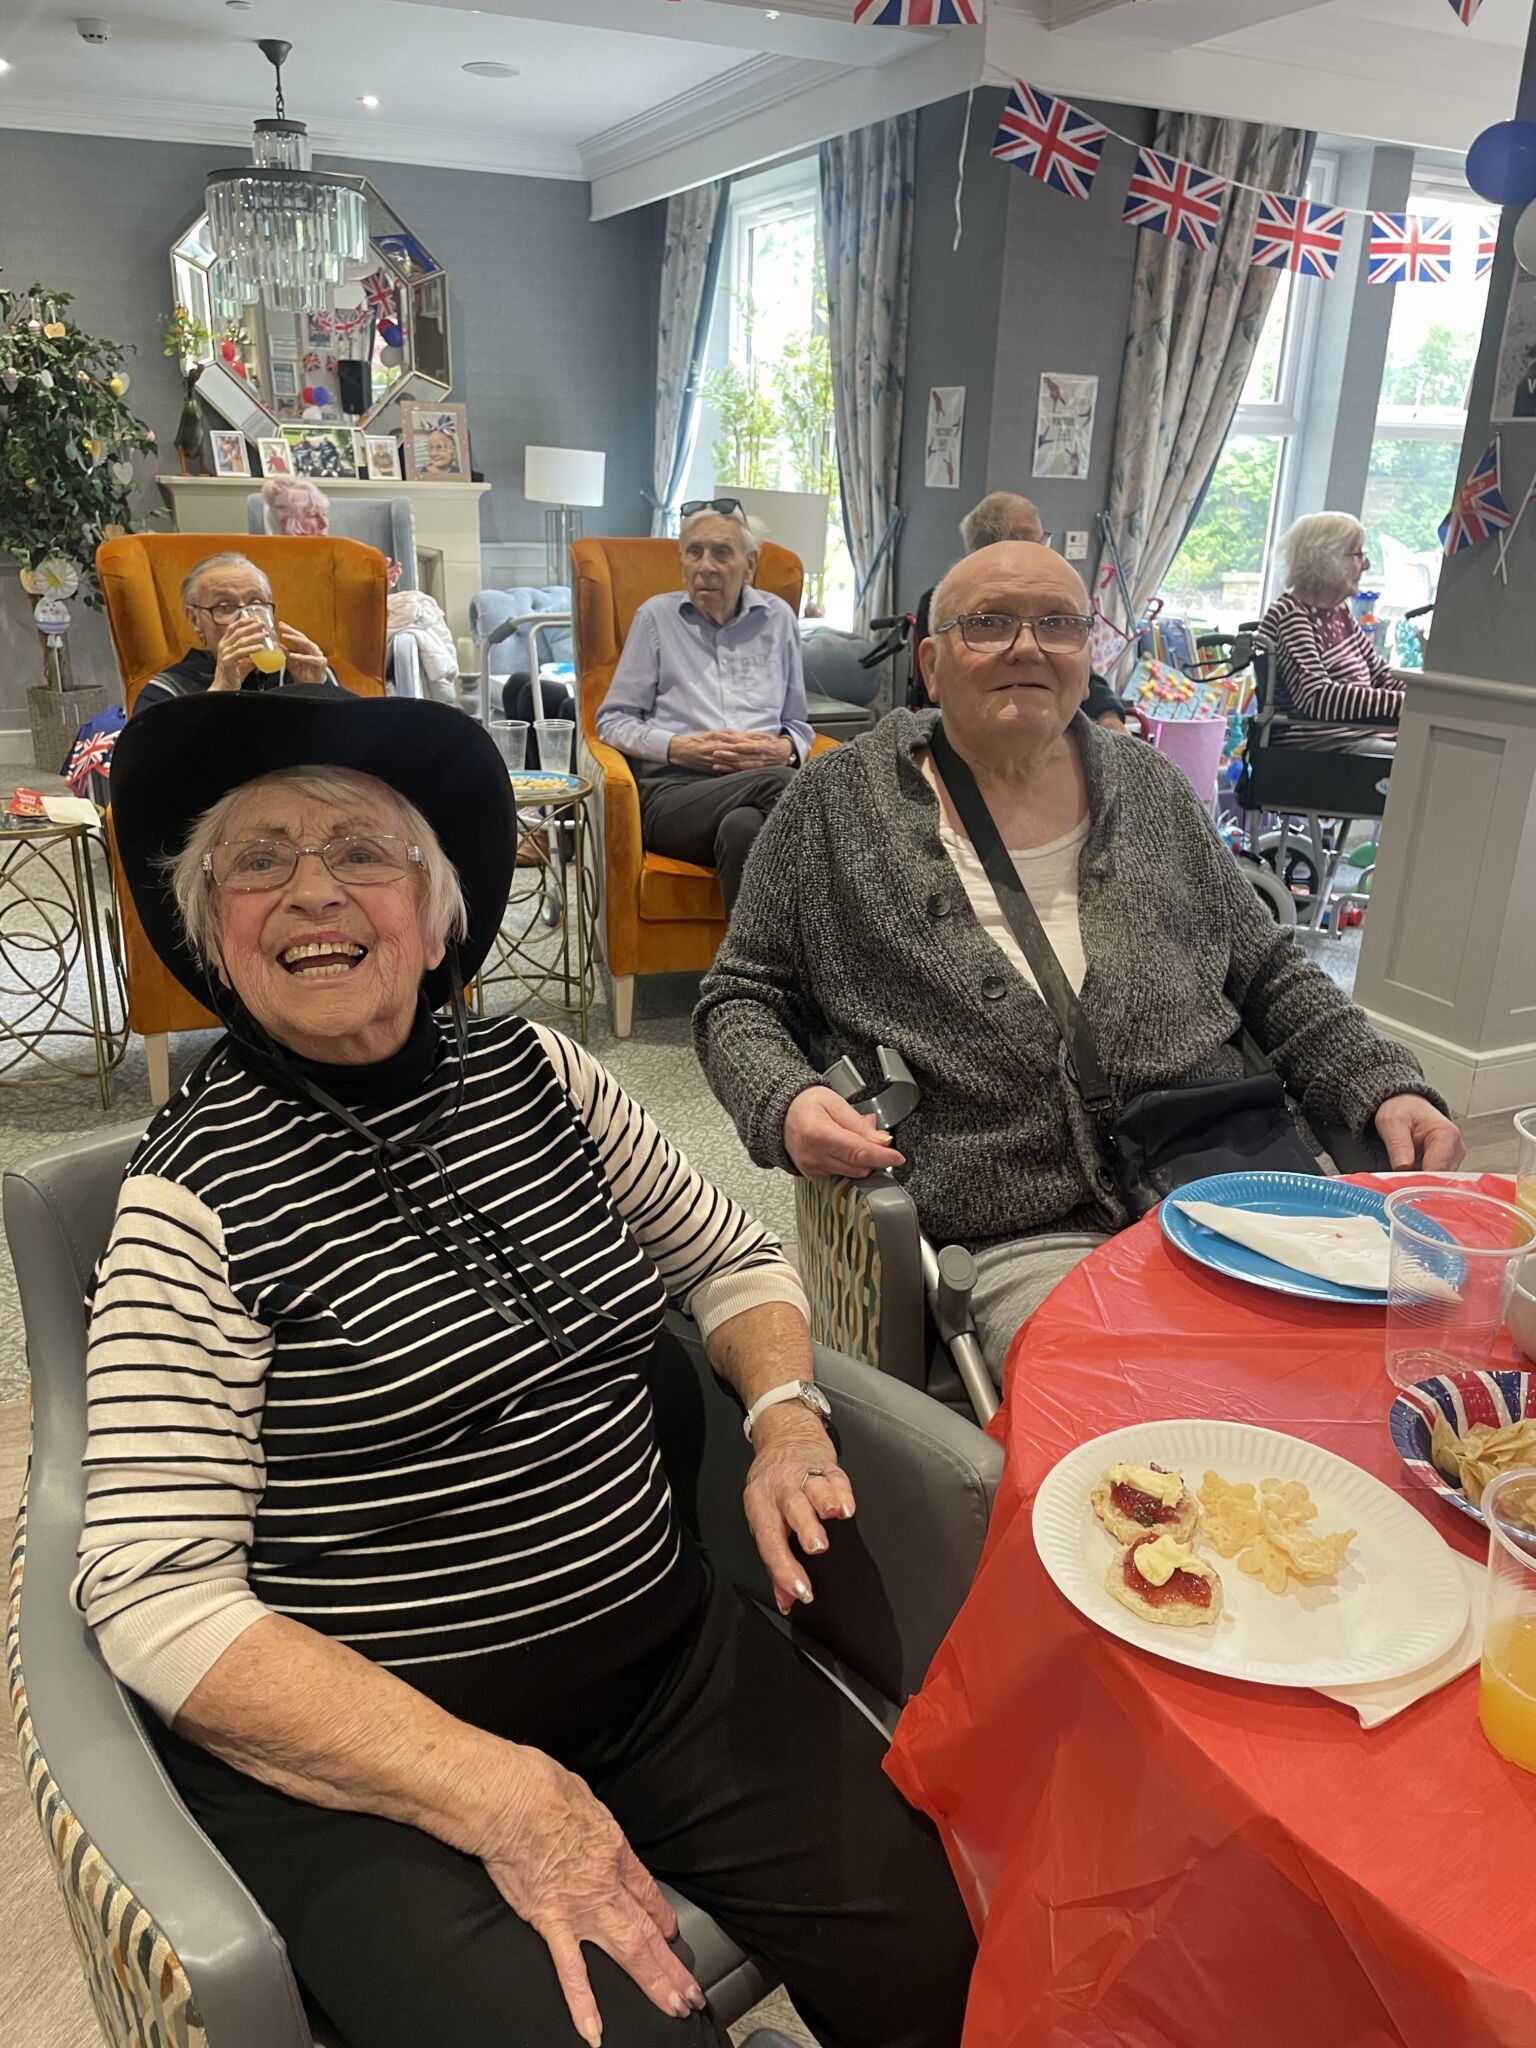 REsidents at Hutton Manor Care Home had a great time at the VE Day celebrations.